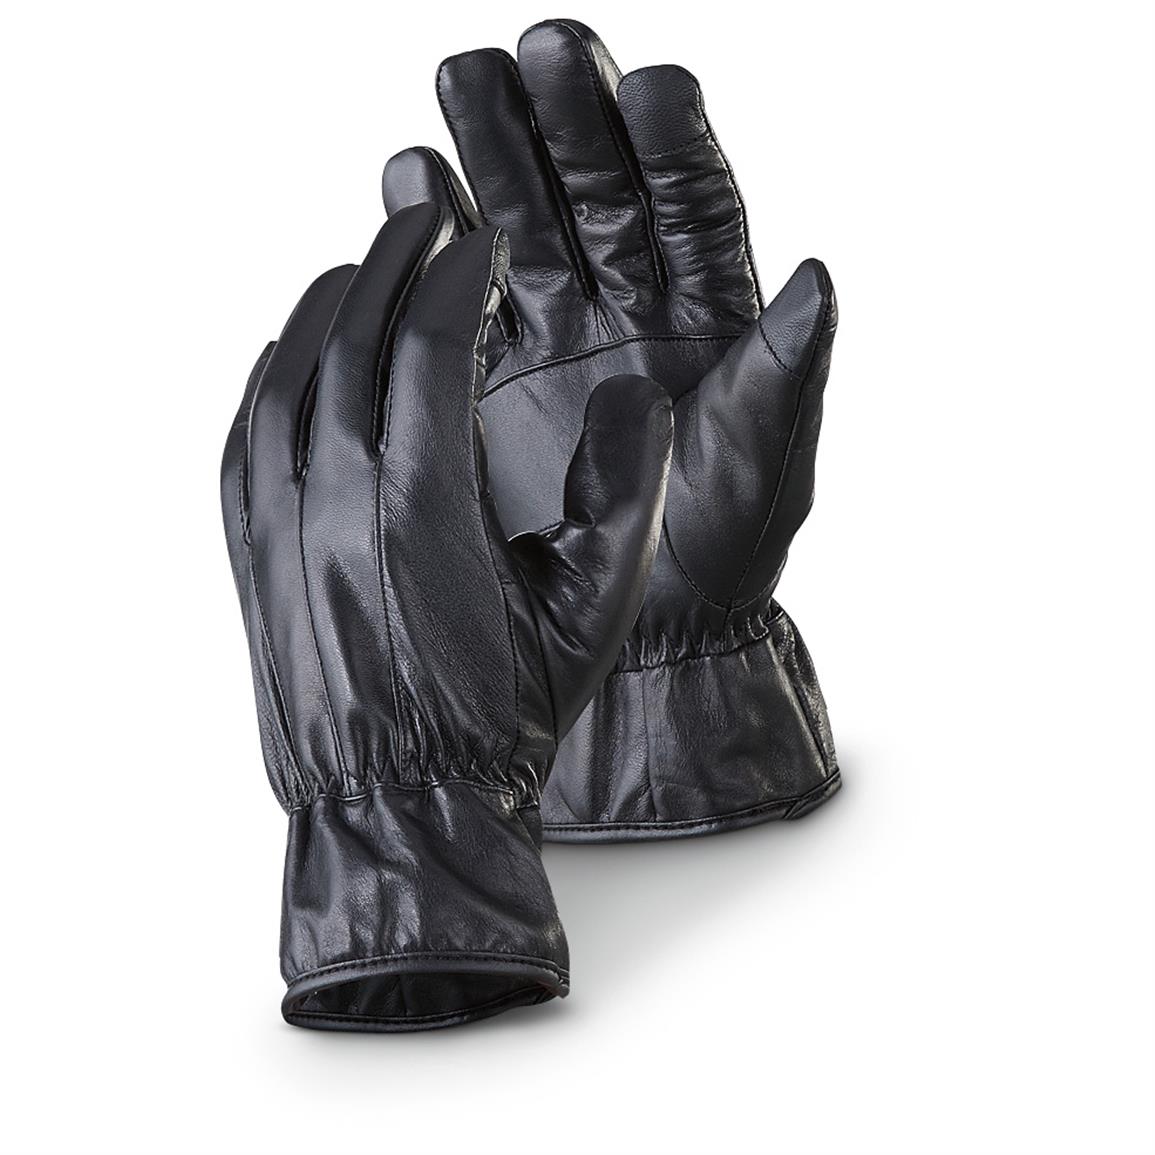 Jacob Ash Pro-Text Men's Insulated Leather Gloves, 40 Grams, 2 Pairs, Black